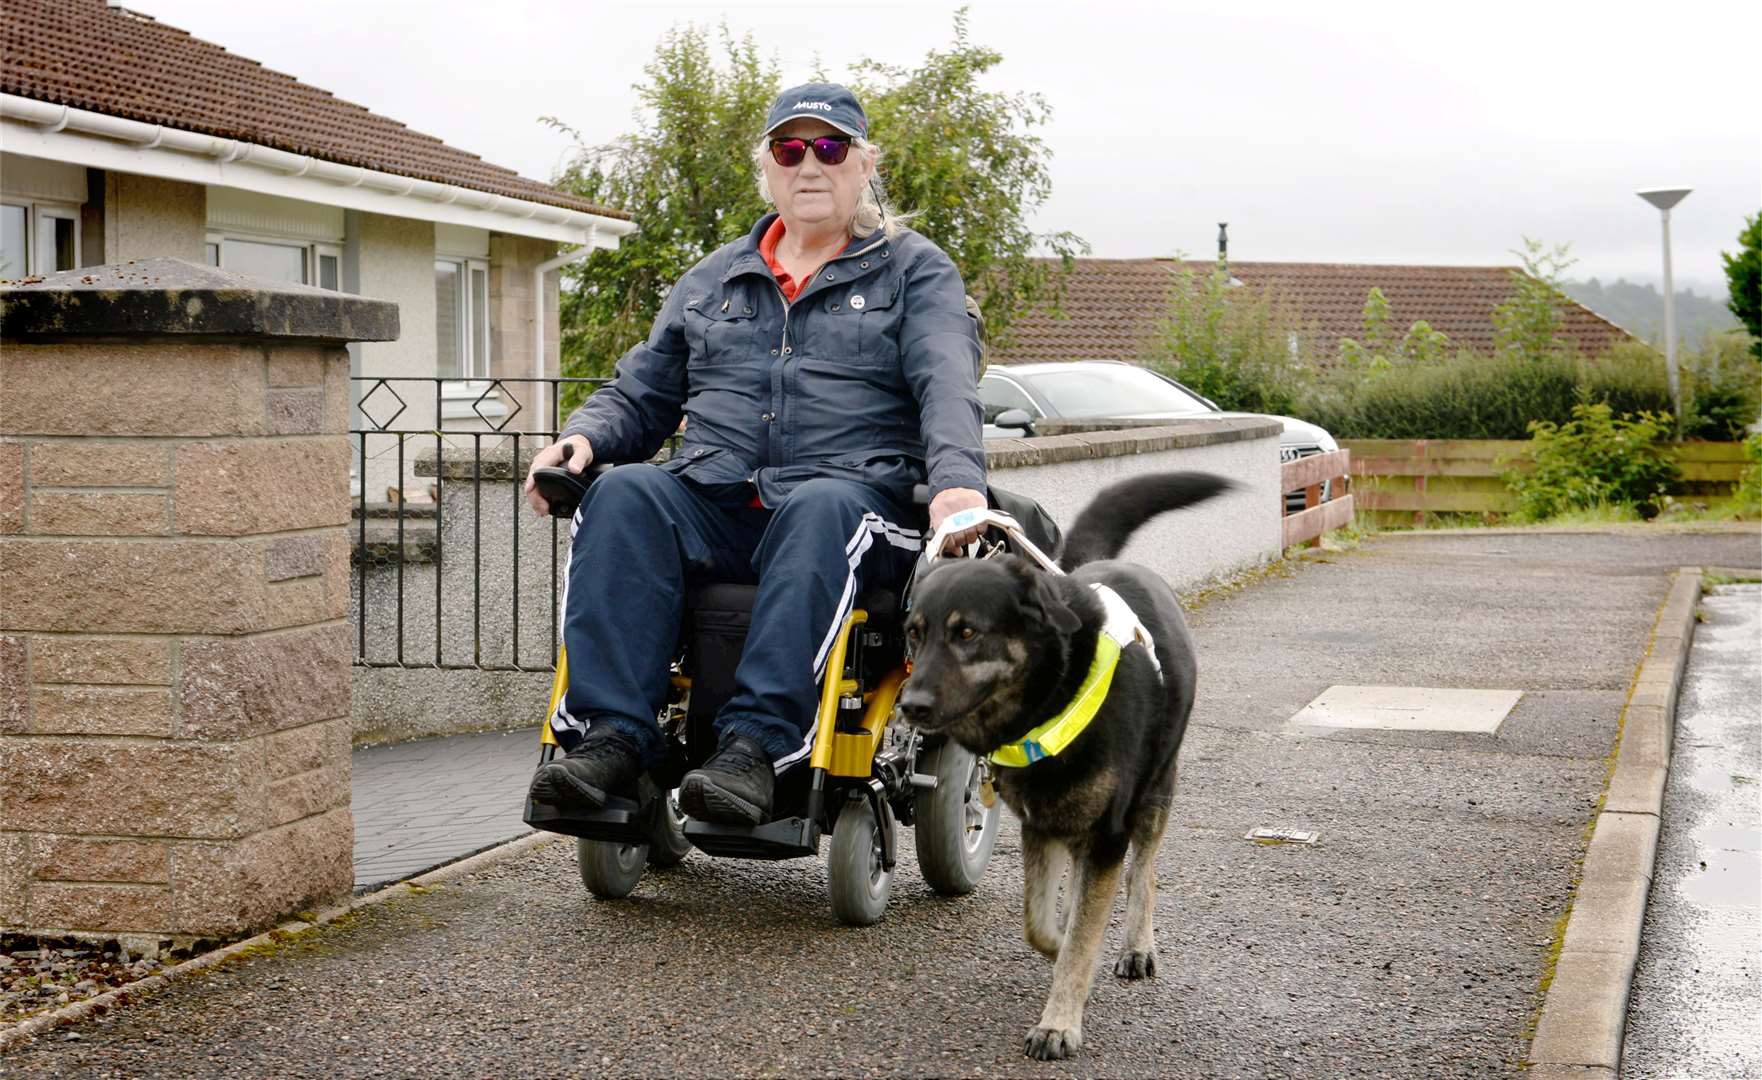 John Long's guide dog Freddie had to be retrained to lead his master's new wheelchair.